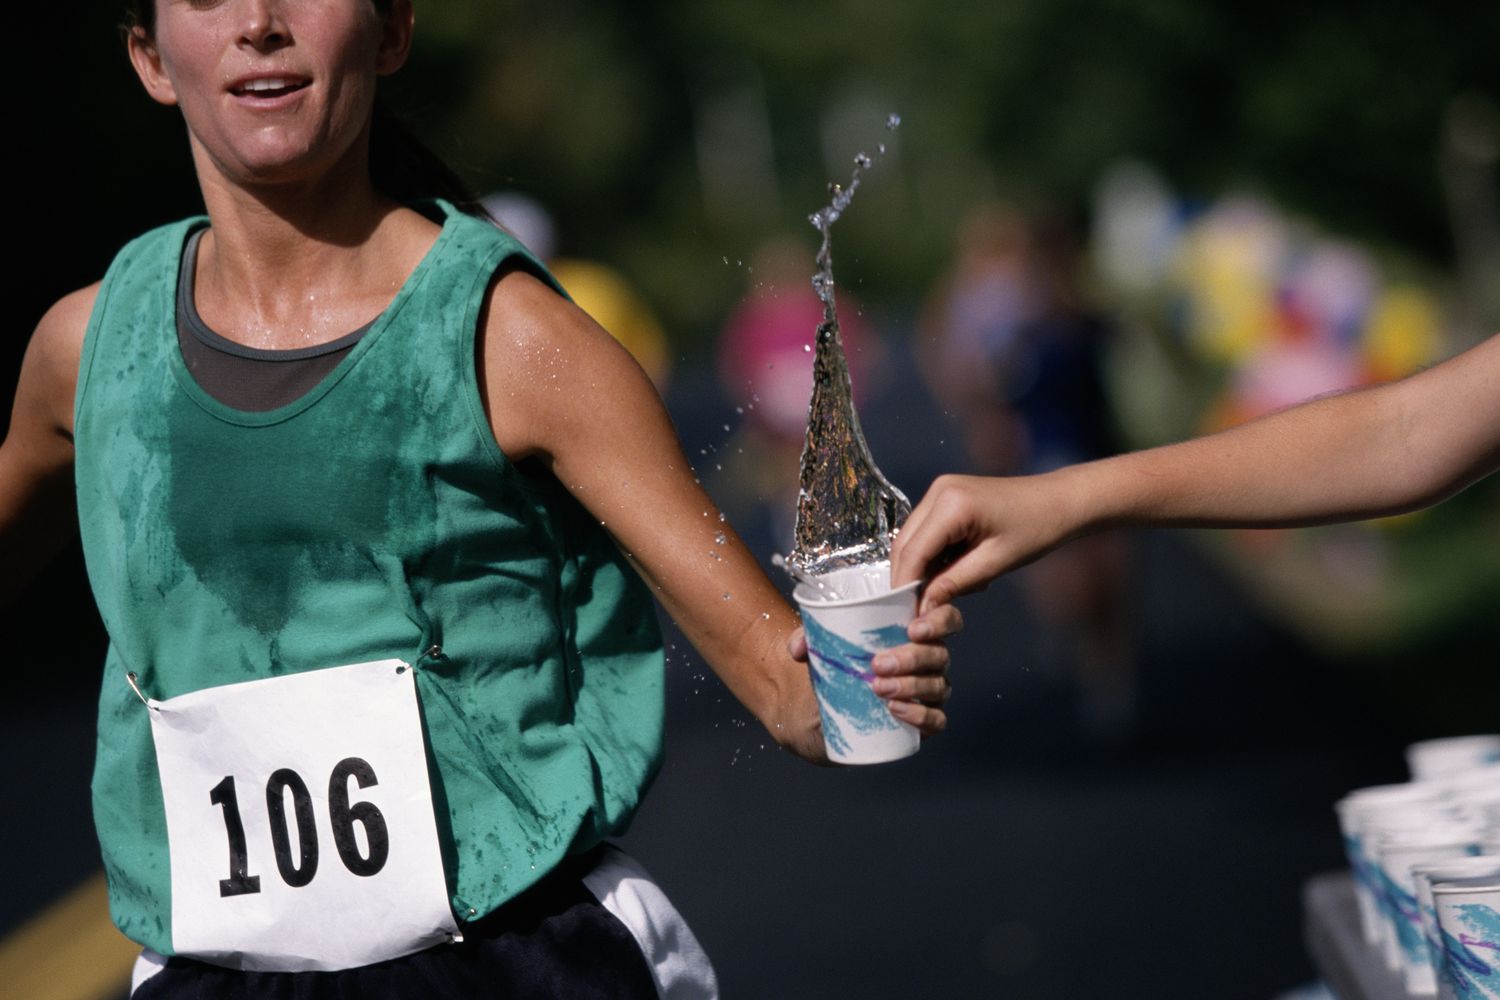 Hydrating while running